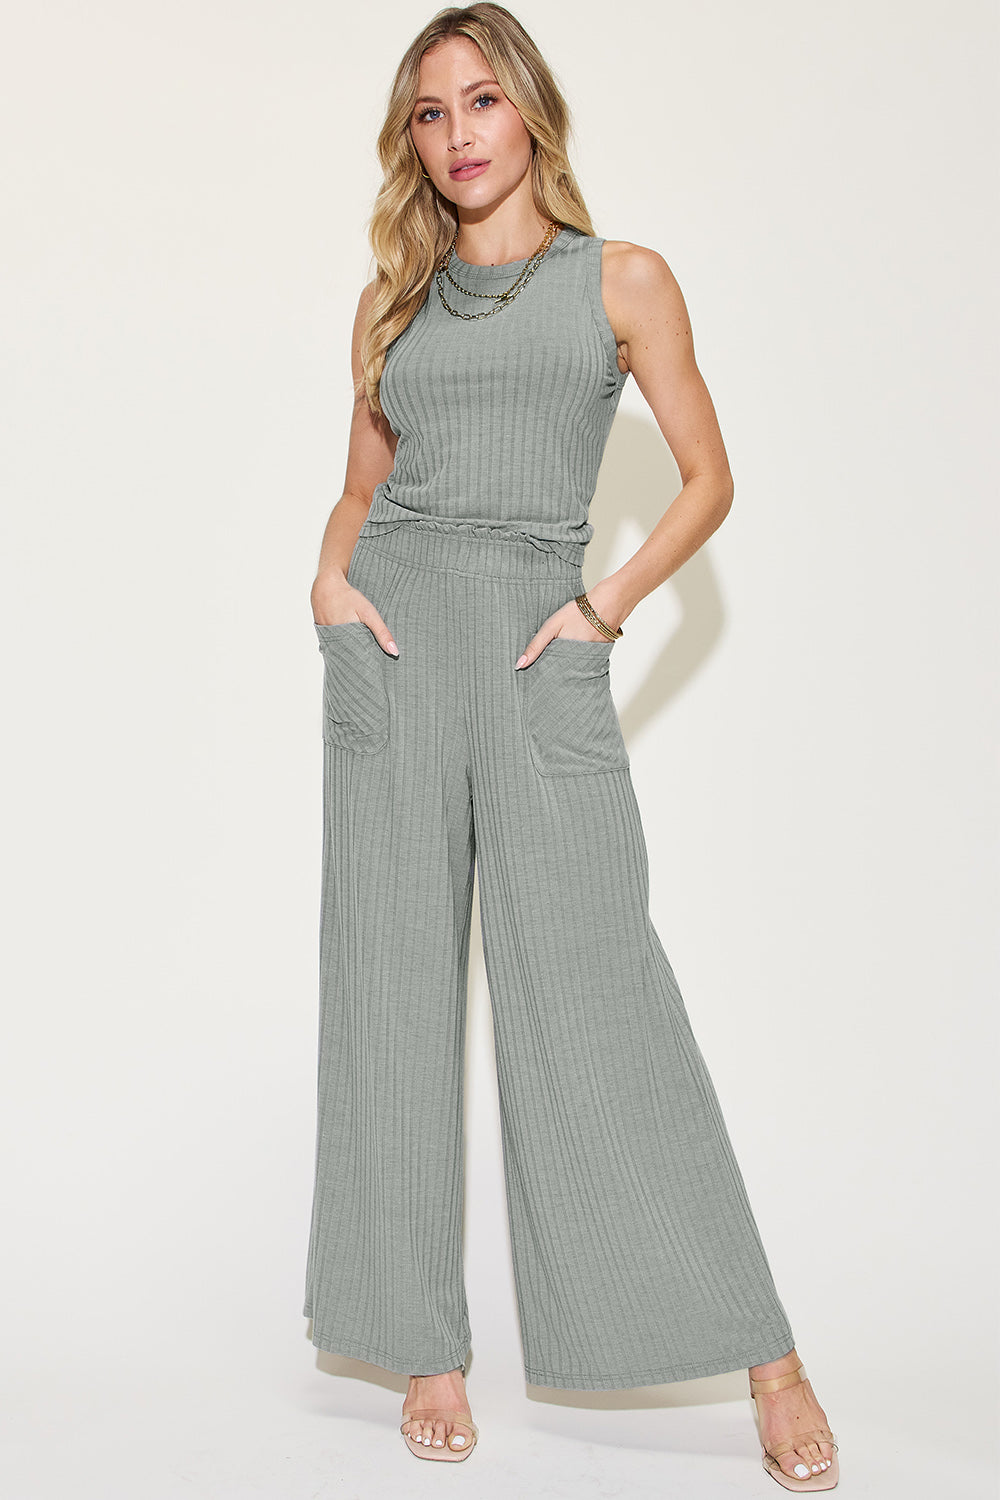 Basic Bae Full Size Ribbed Tank and Wide Leg Pants Set - The Teal Antler Boutique